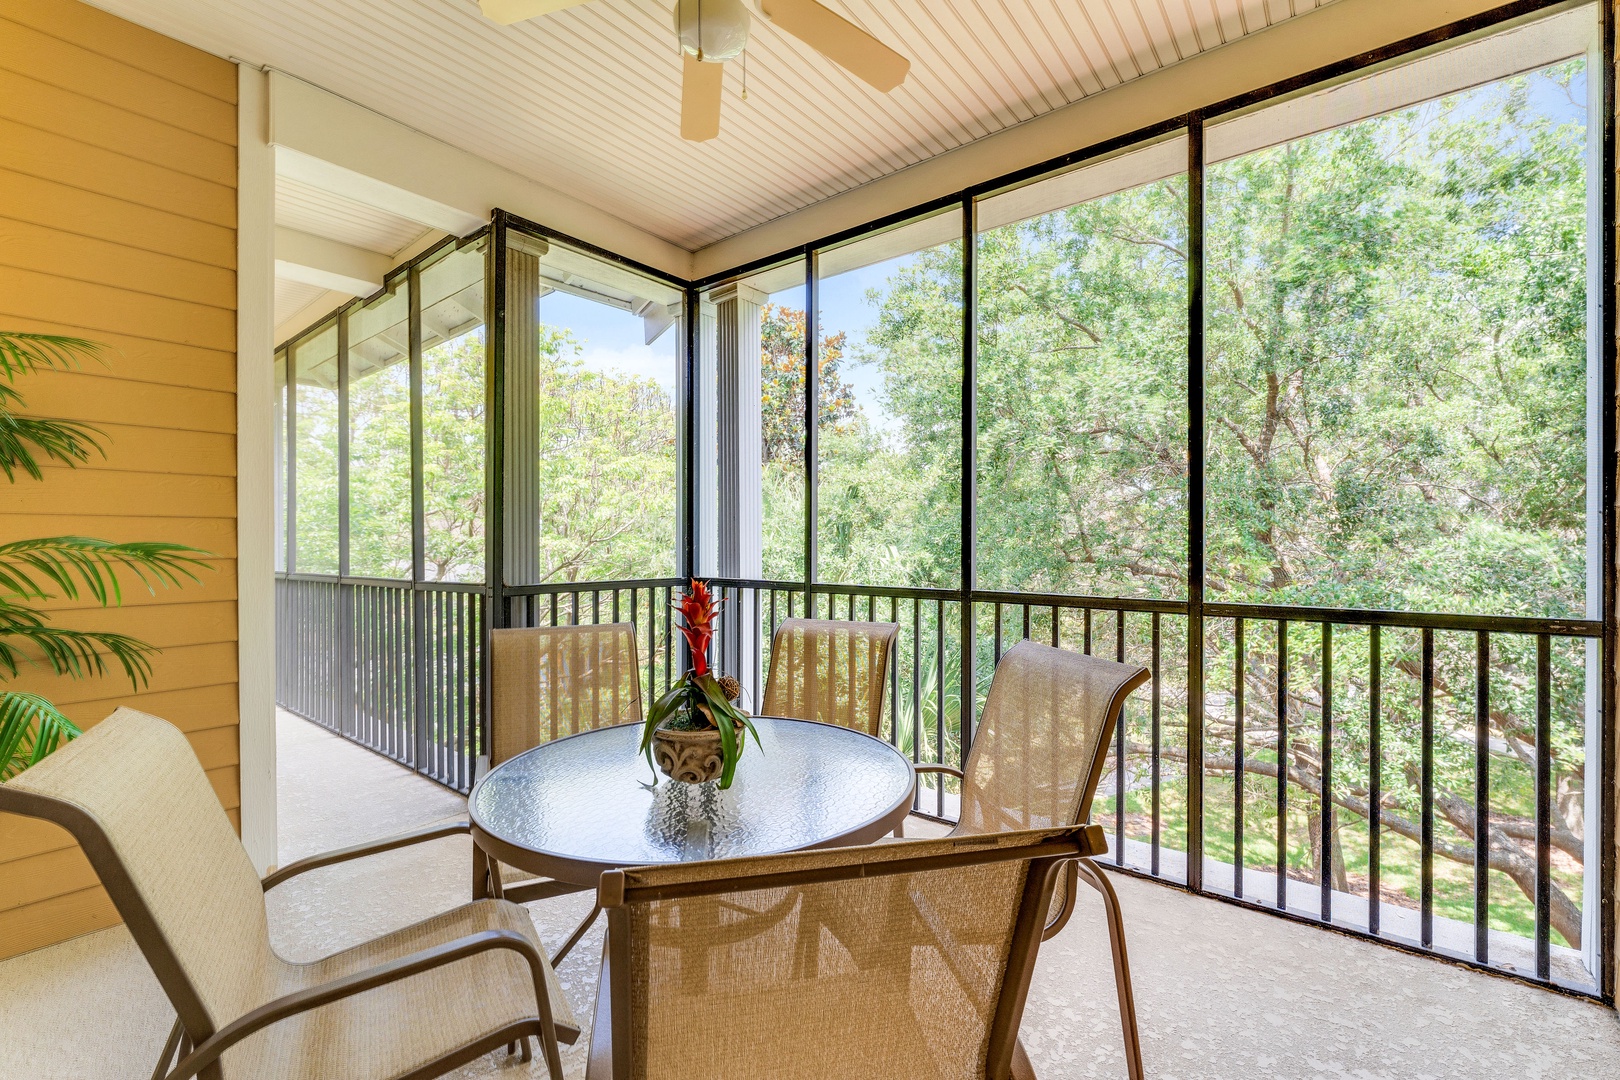 Step out onto the screened balcony & lounge in the fresh air